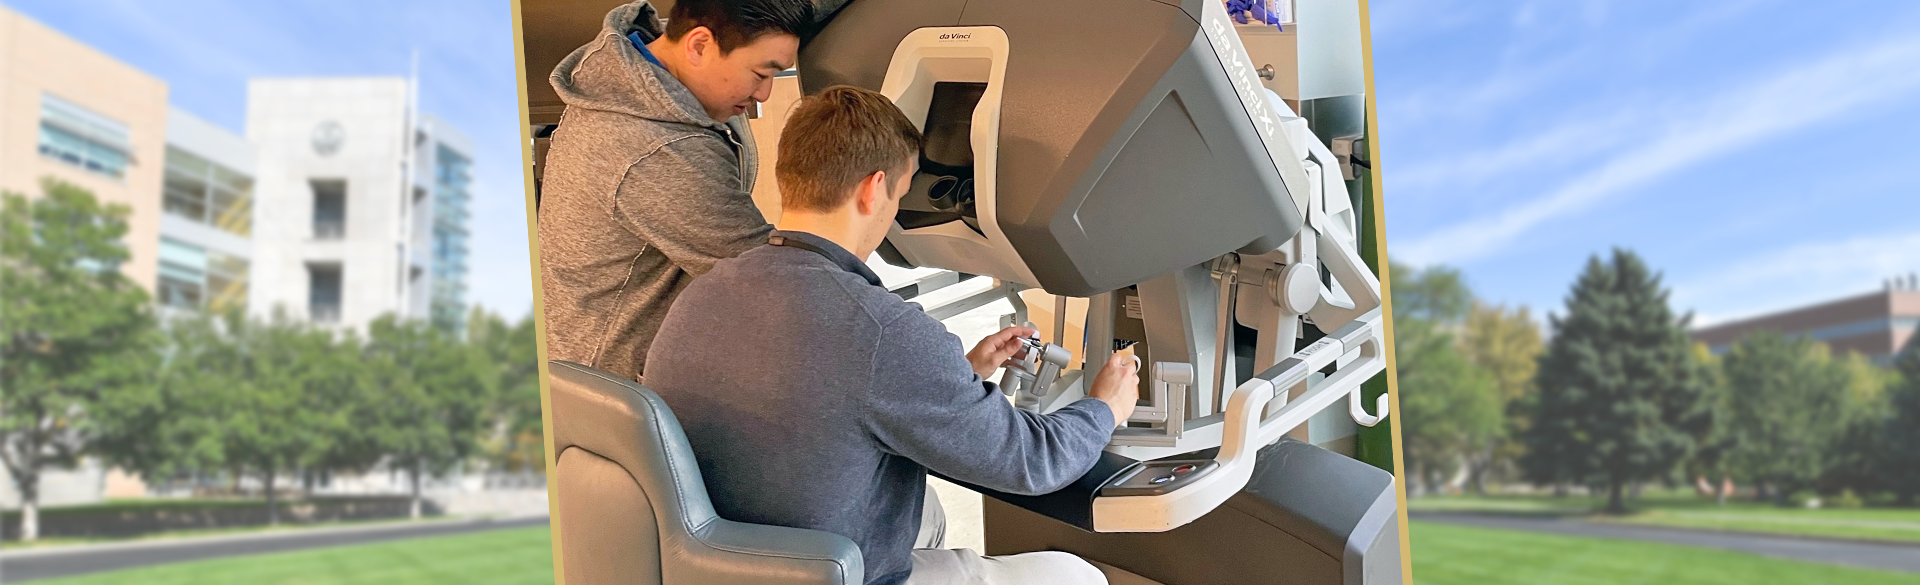 General surgery residents at the CU Department of Surgery are receiving valuable training with new robotic surgical equipment.